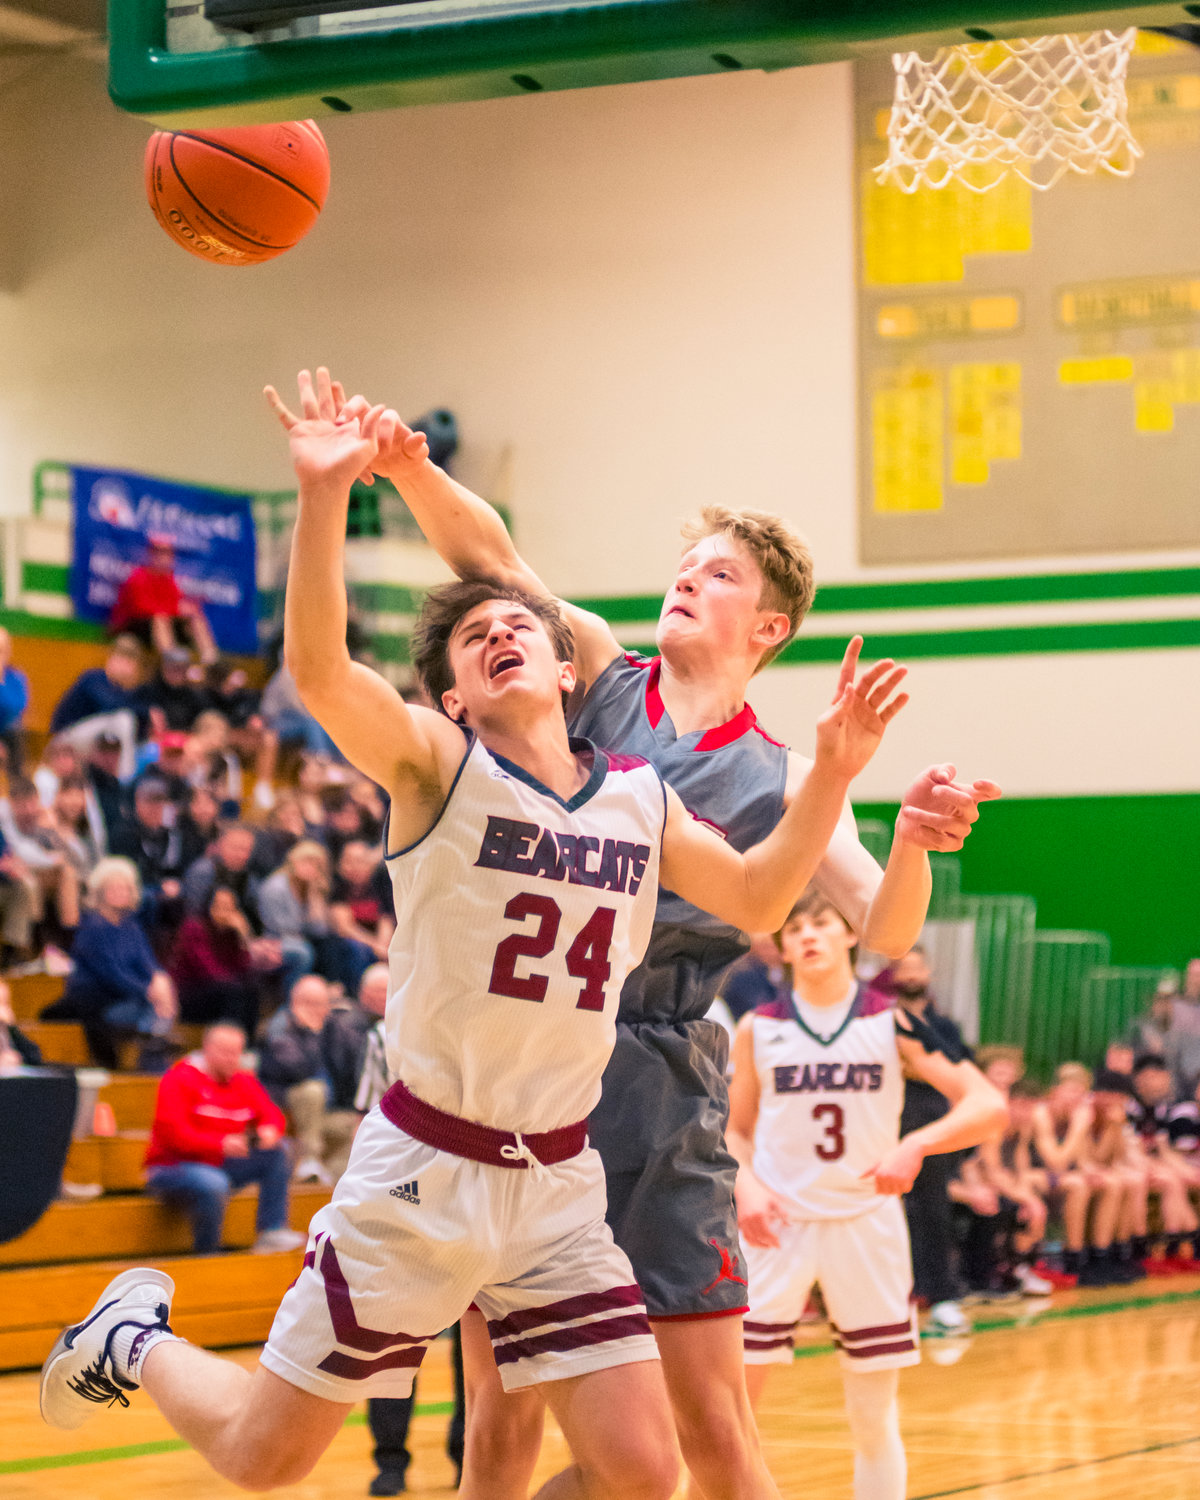 W.F. West's Max Taylor (24) is fouled on his way to the hoop during a game against Jacks Thursday night at Tumwater High School.